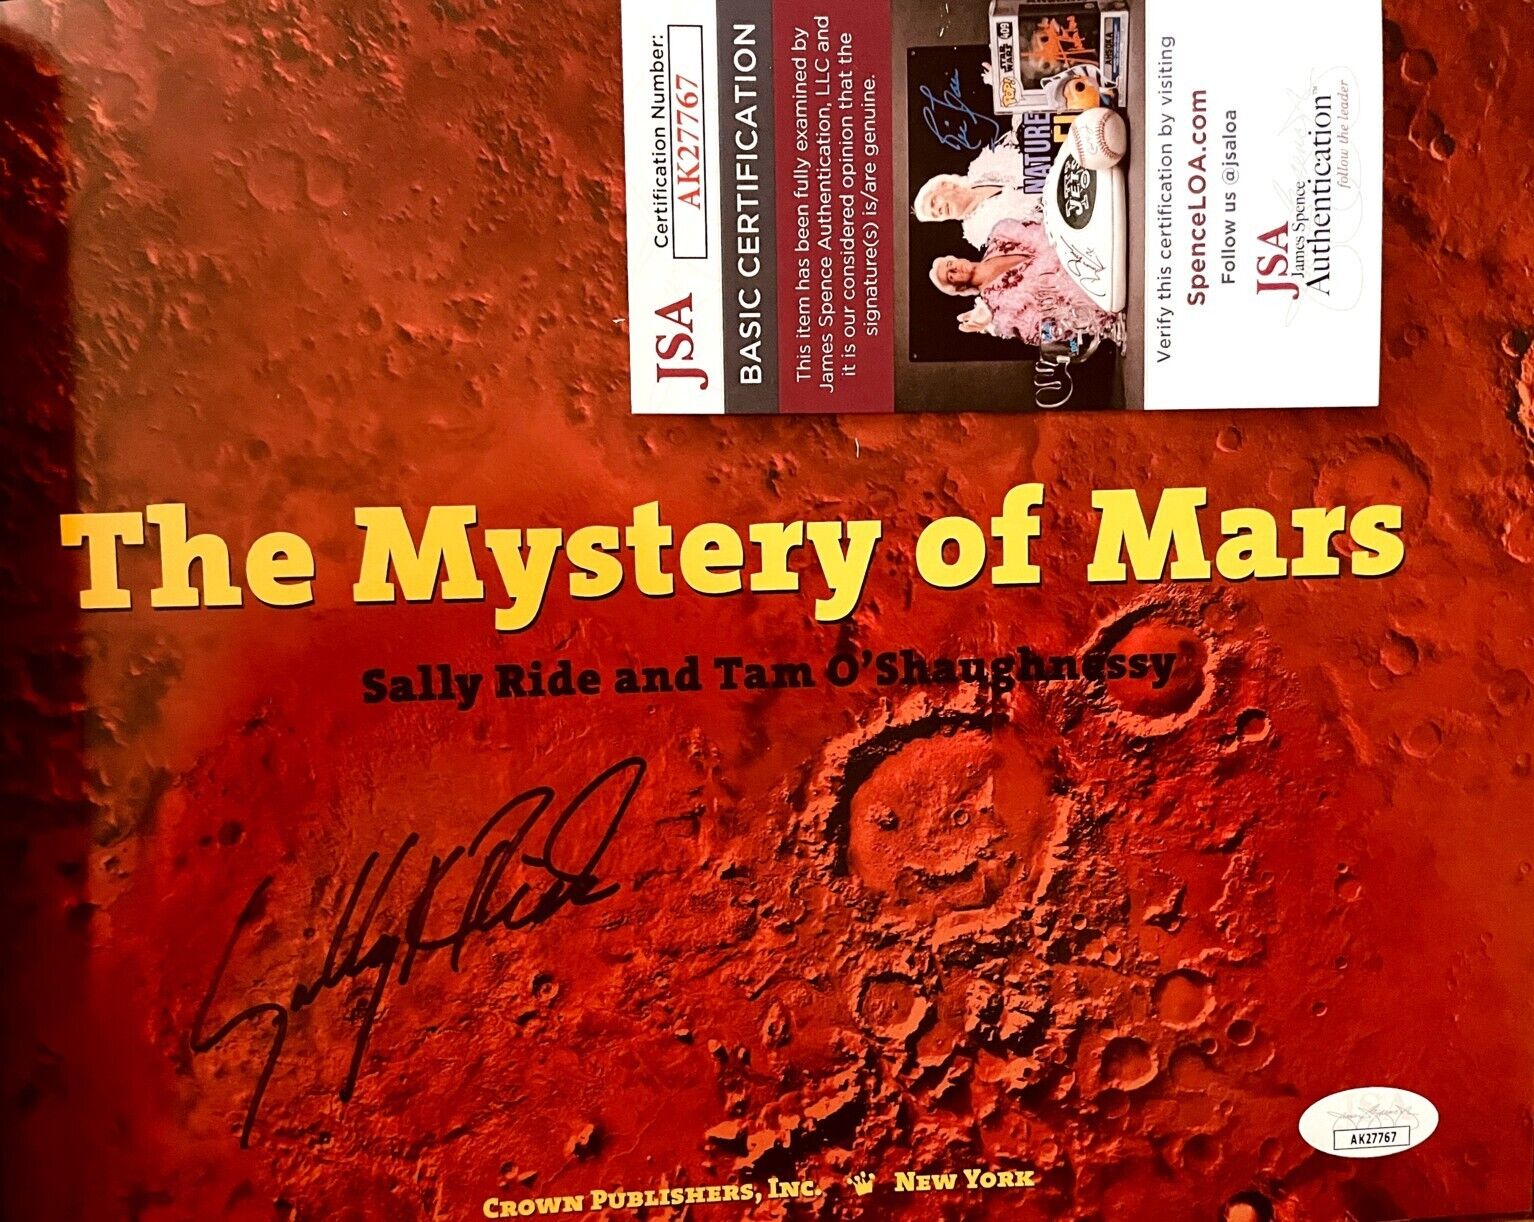 Sally Ride autographed signed autograph Mystery of Mars hardcover photo book JSA